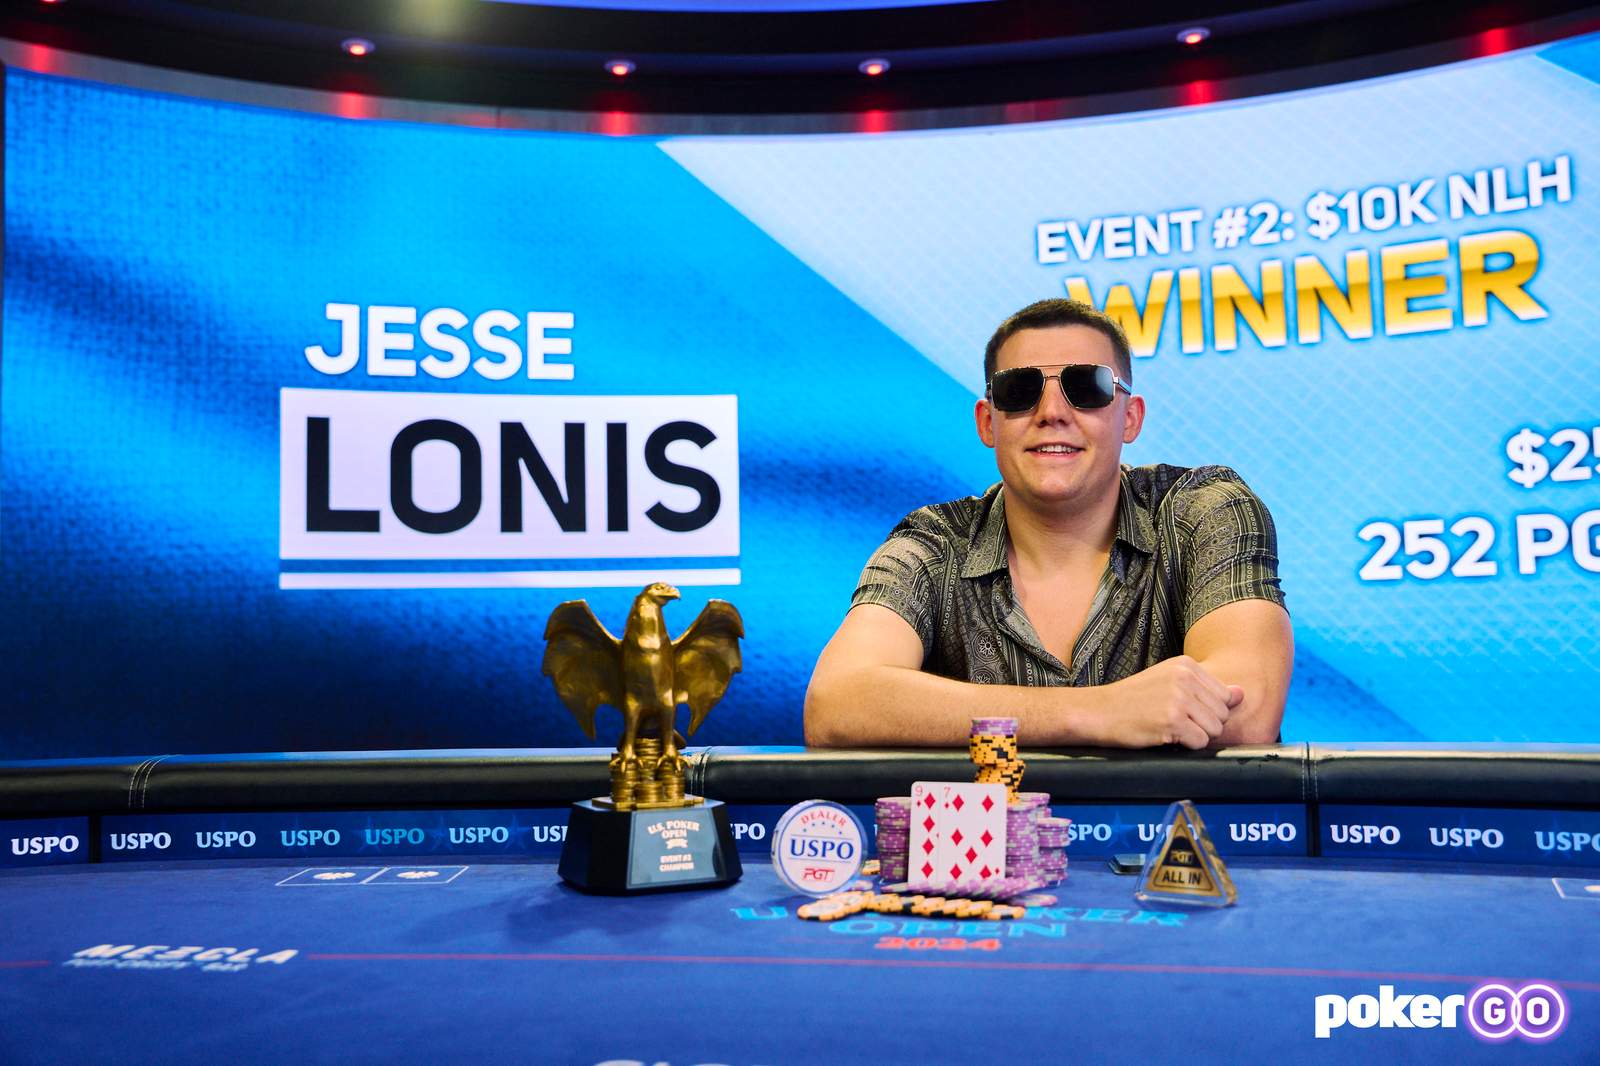 Jesse Lonis Goes Wire-to-Wire to Win 3rd PGT Title